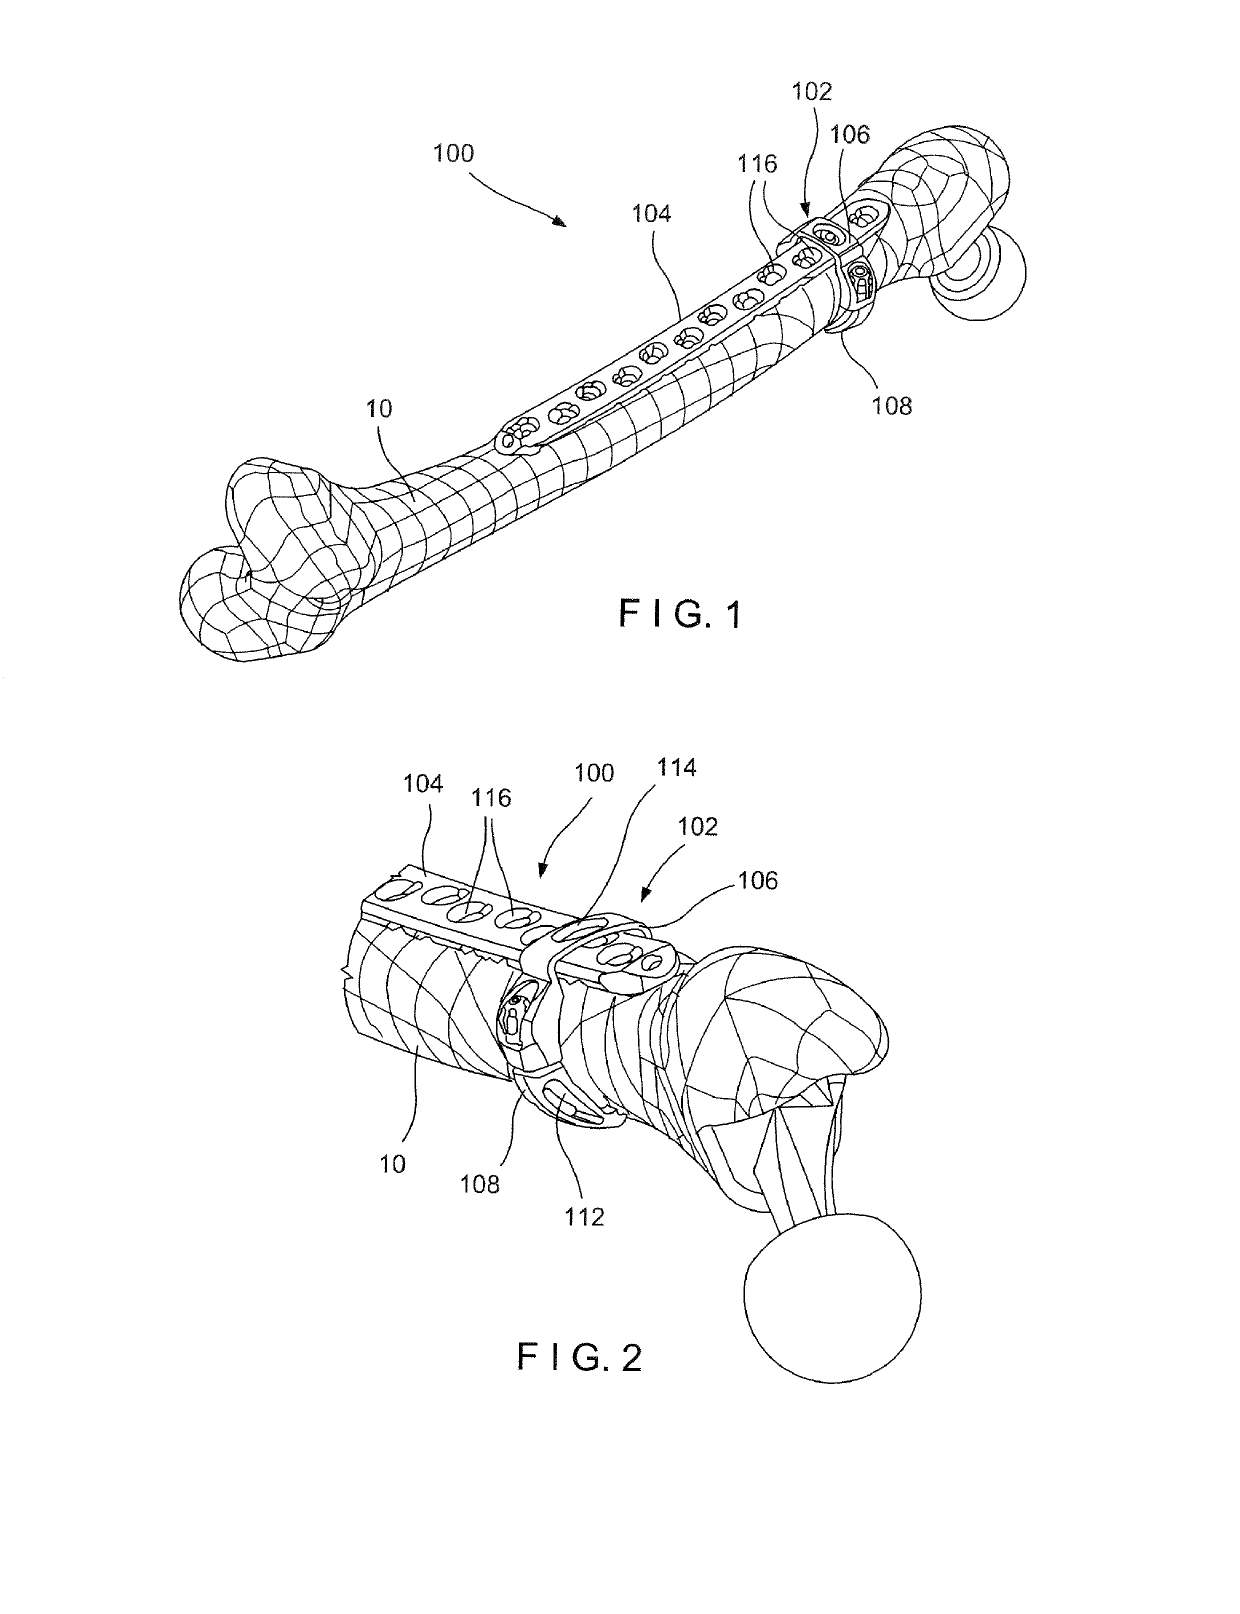 Bone Fracture Fixation Clamp with Bone Remodeling Adaptability